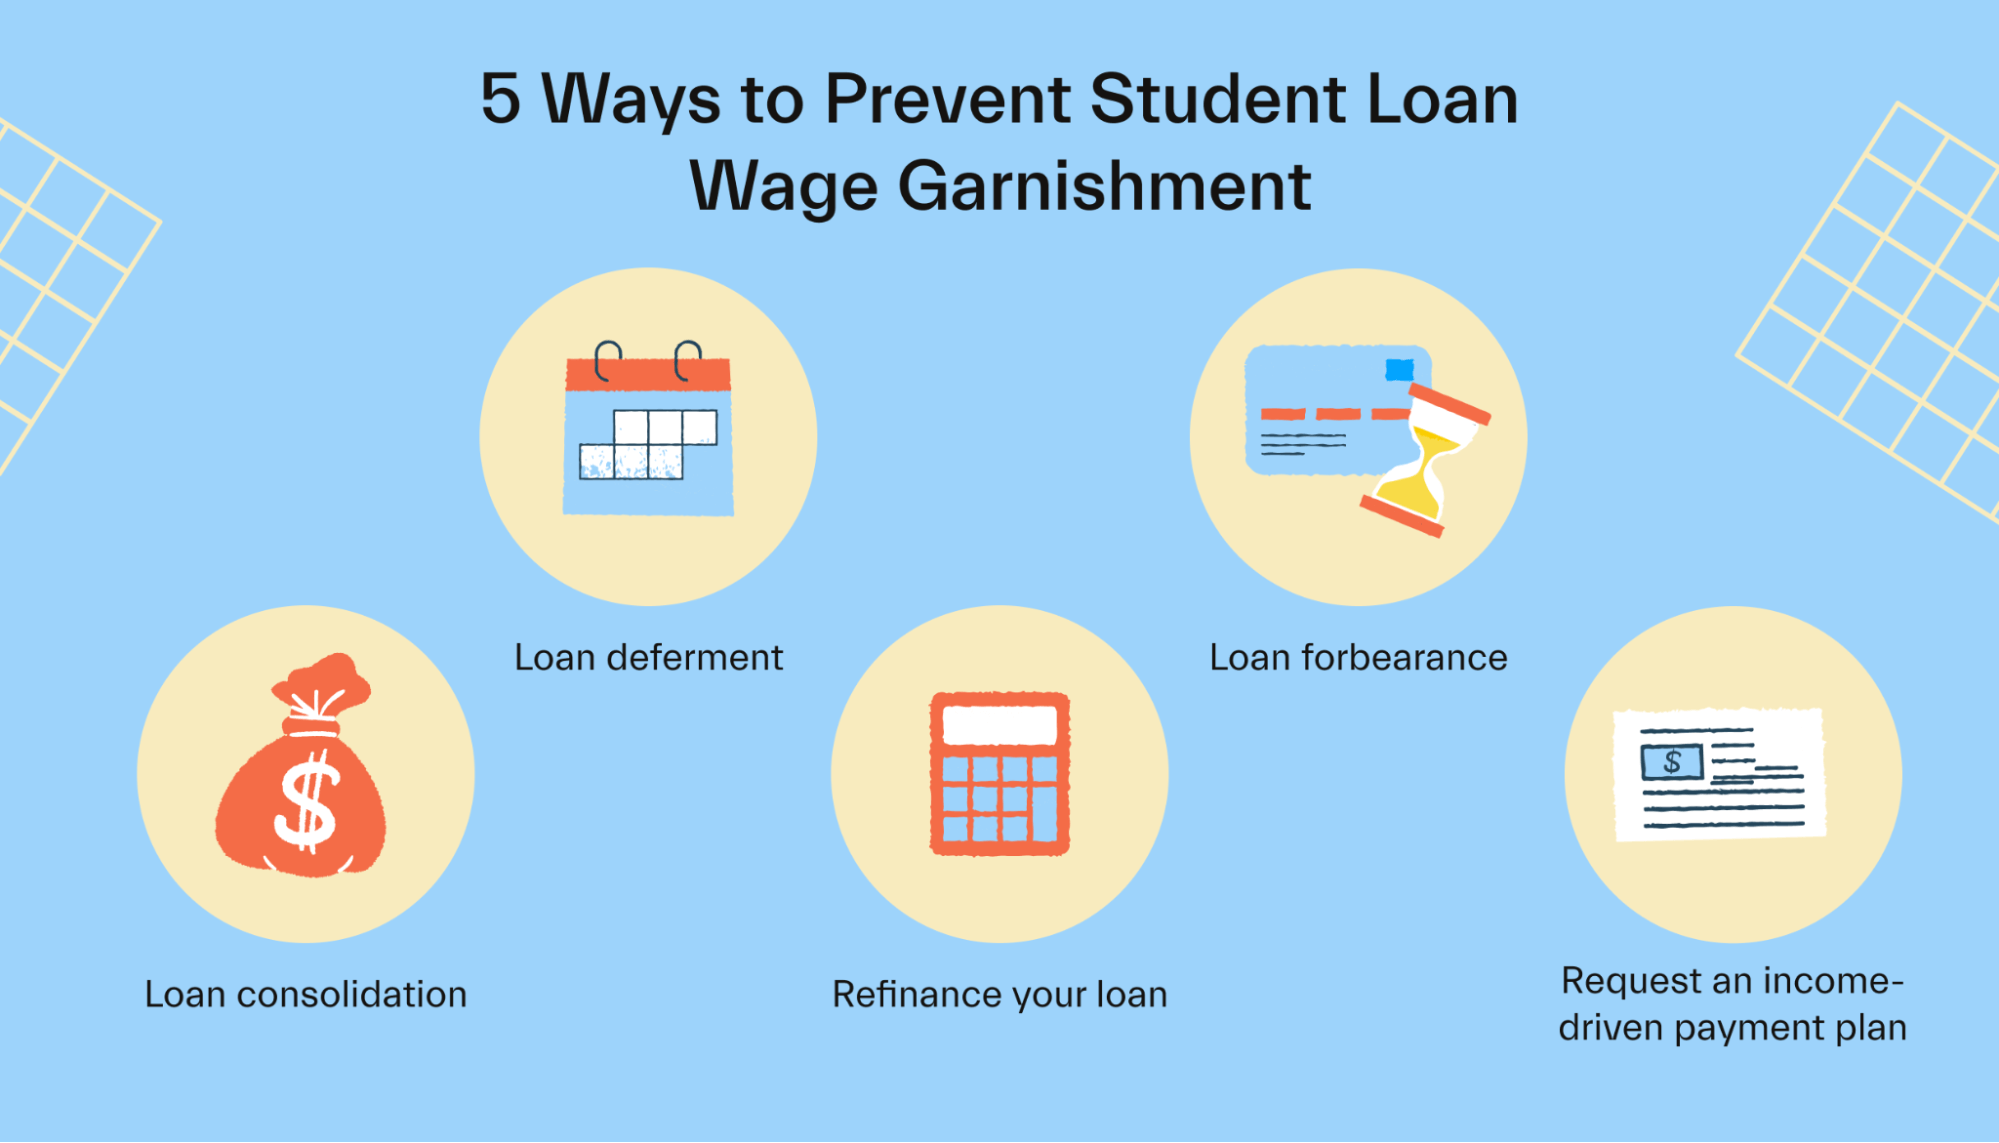 5 ways to prevent student loan wage garnishment